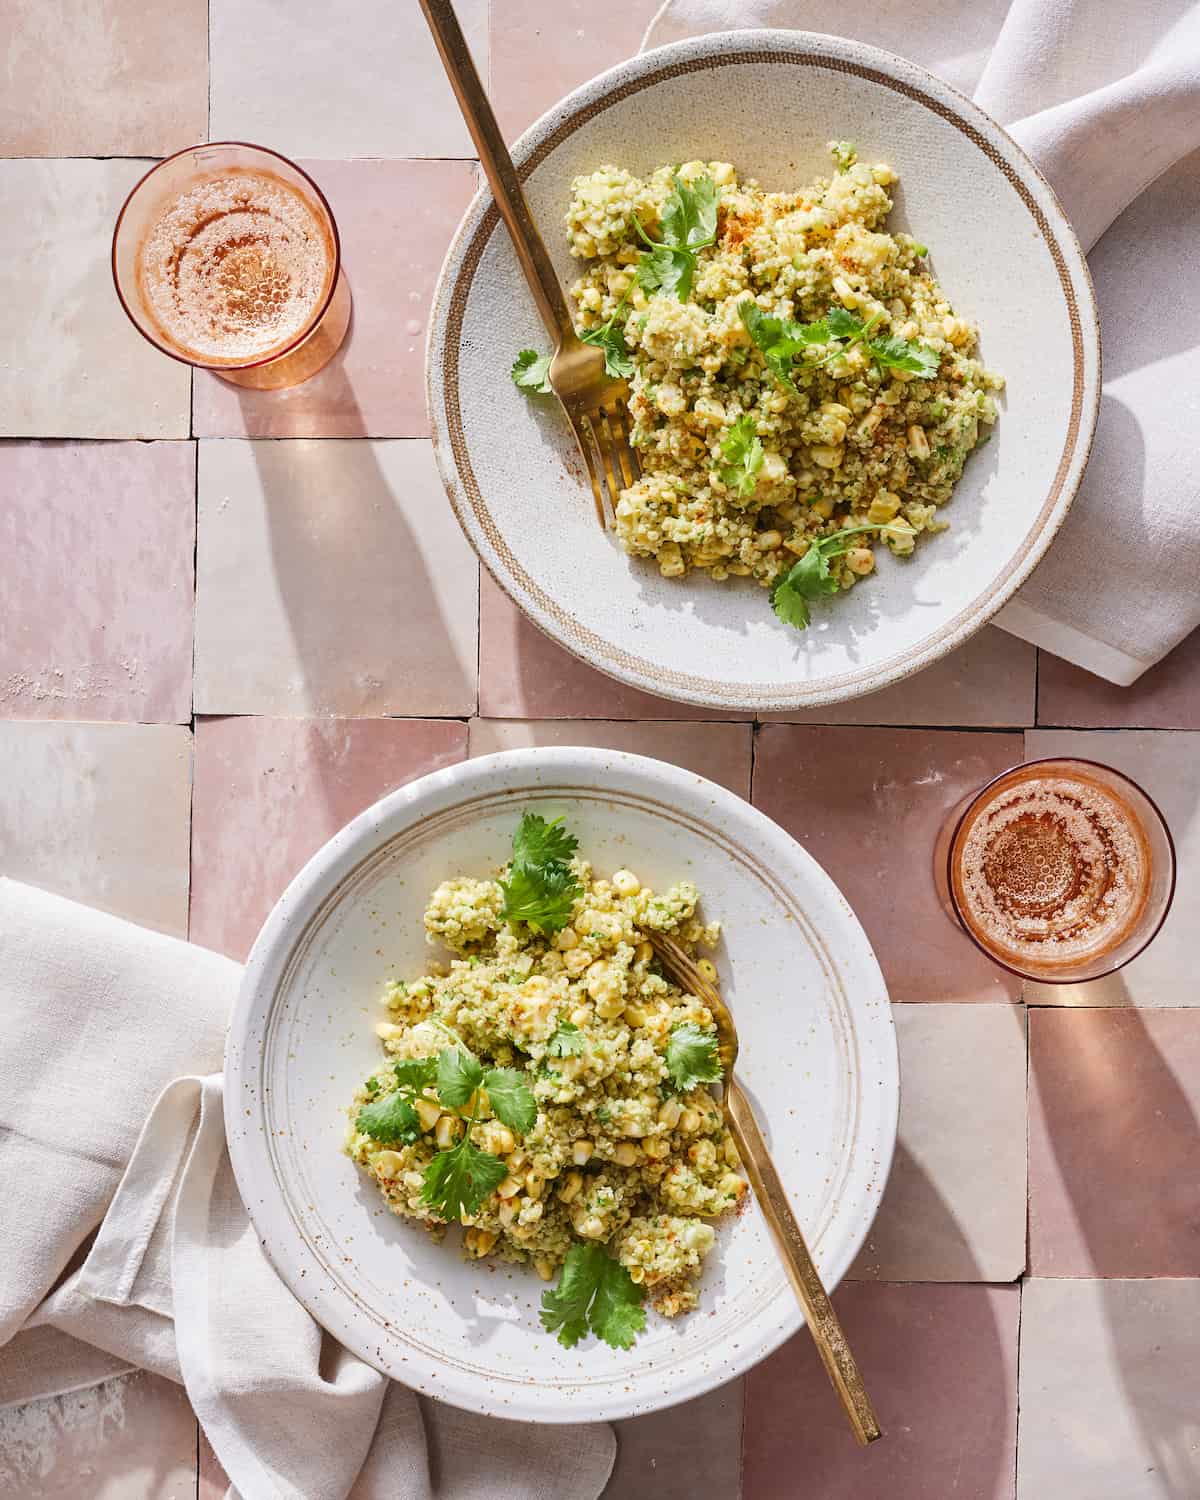 Two bowls of quinoa with roasted corn, avocado and and cilantro sitting next to two glasses of rose on a tile table.  